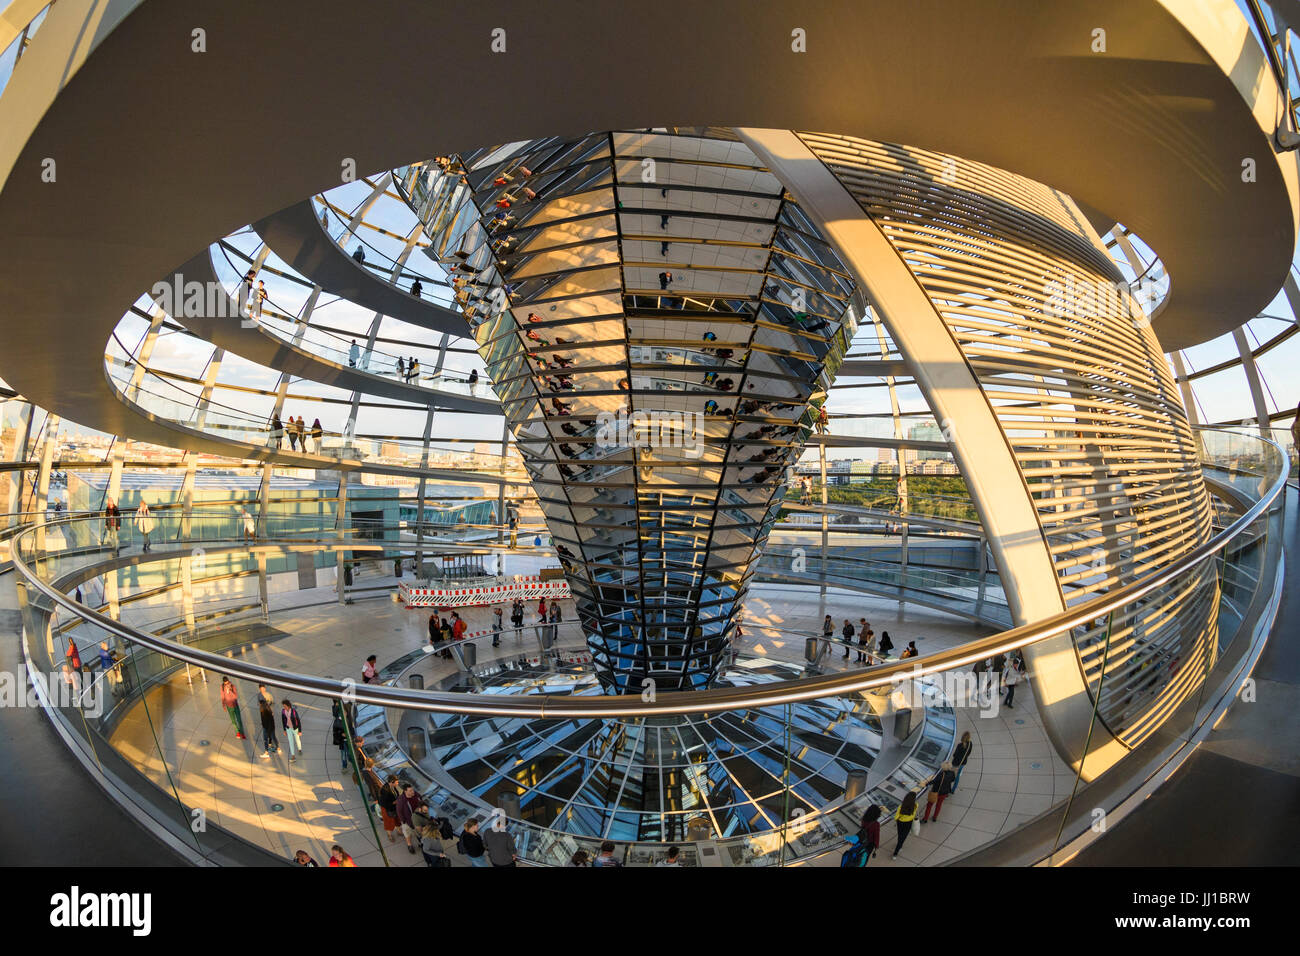 Berlin. Germany. Interior of the Reichstag dome and spiral ramp at sunset. Stock Photo